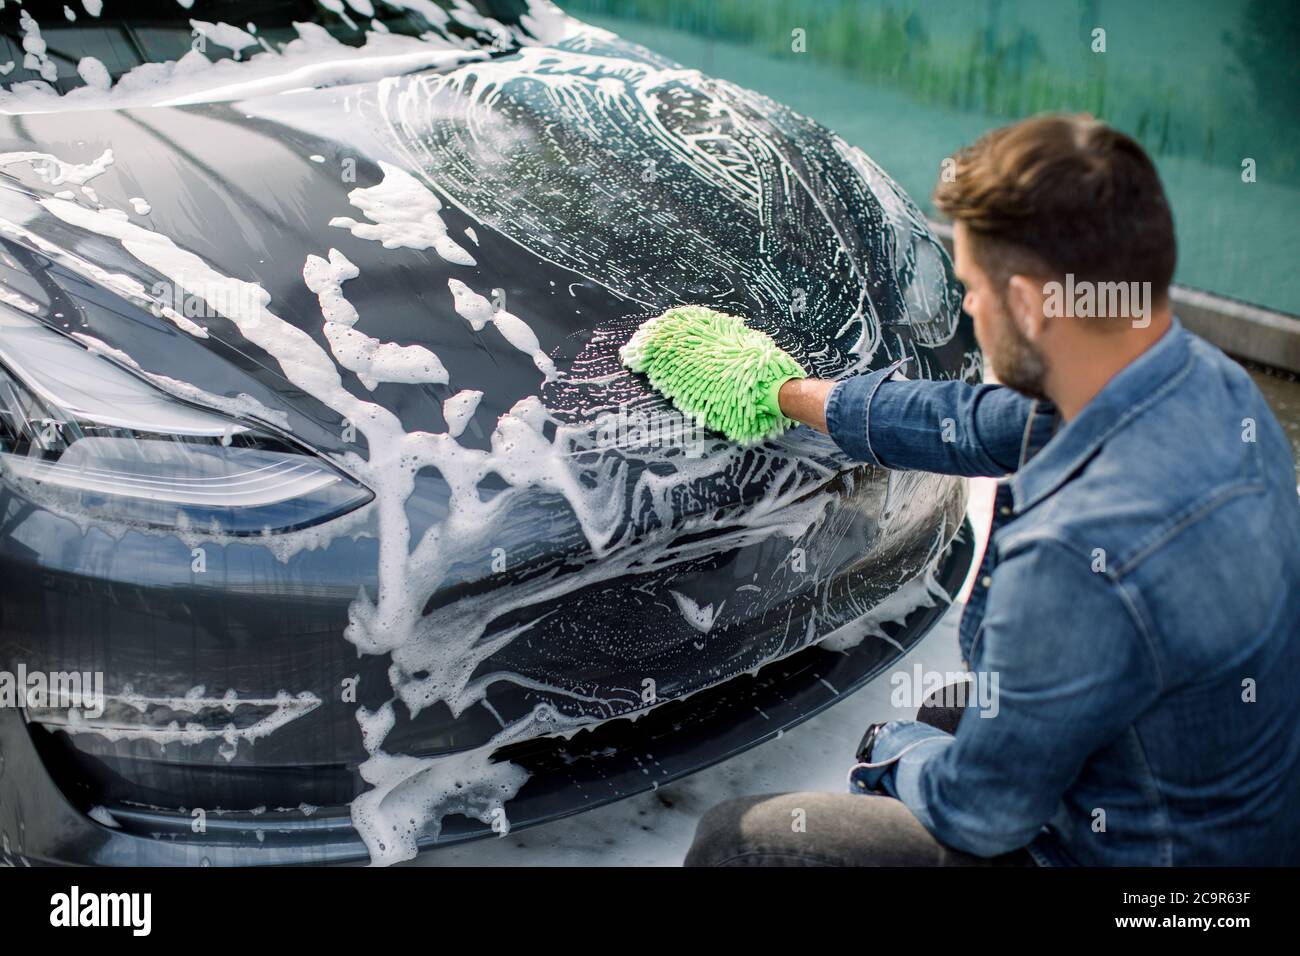 Premium Photo  A man washes his car at a selfservice car wash using a hose  with pressurized water